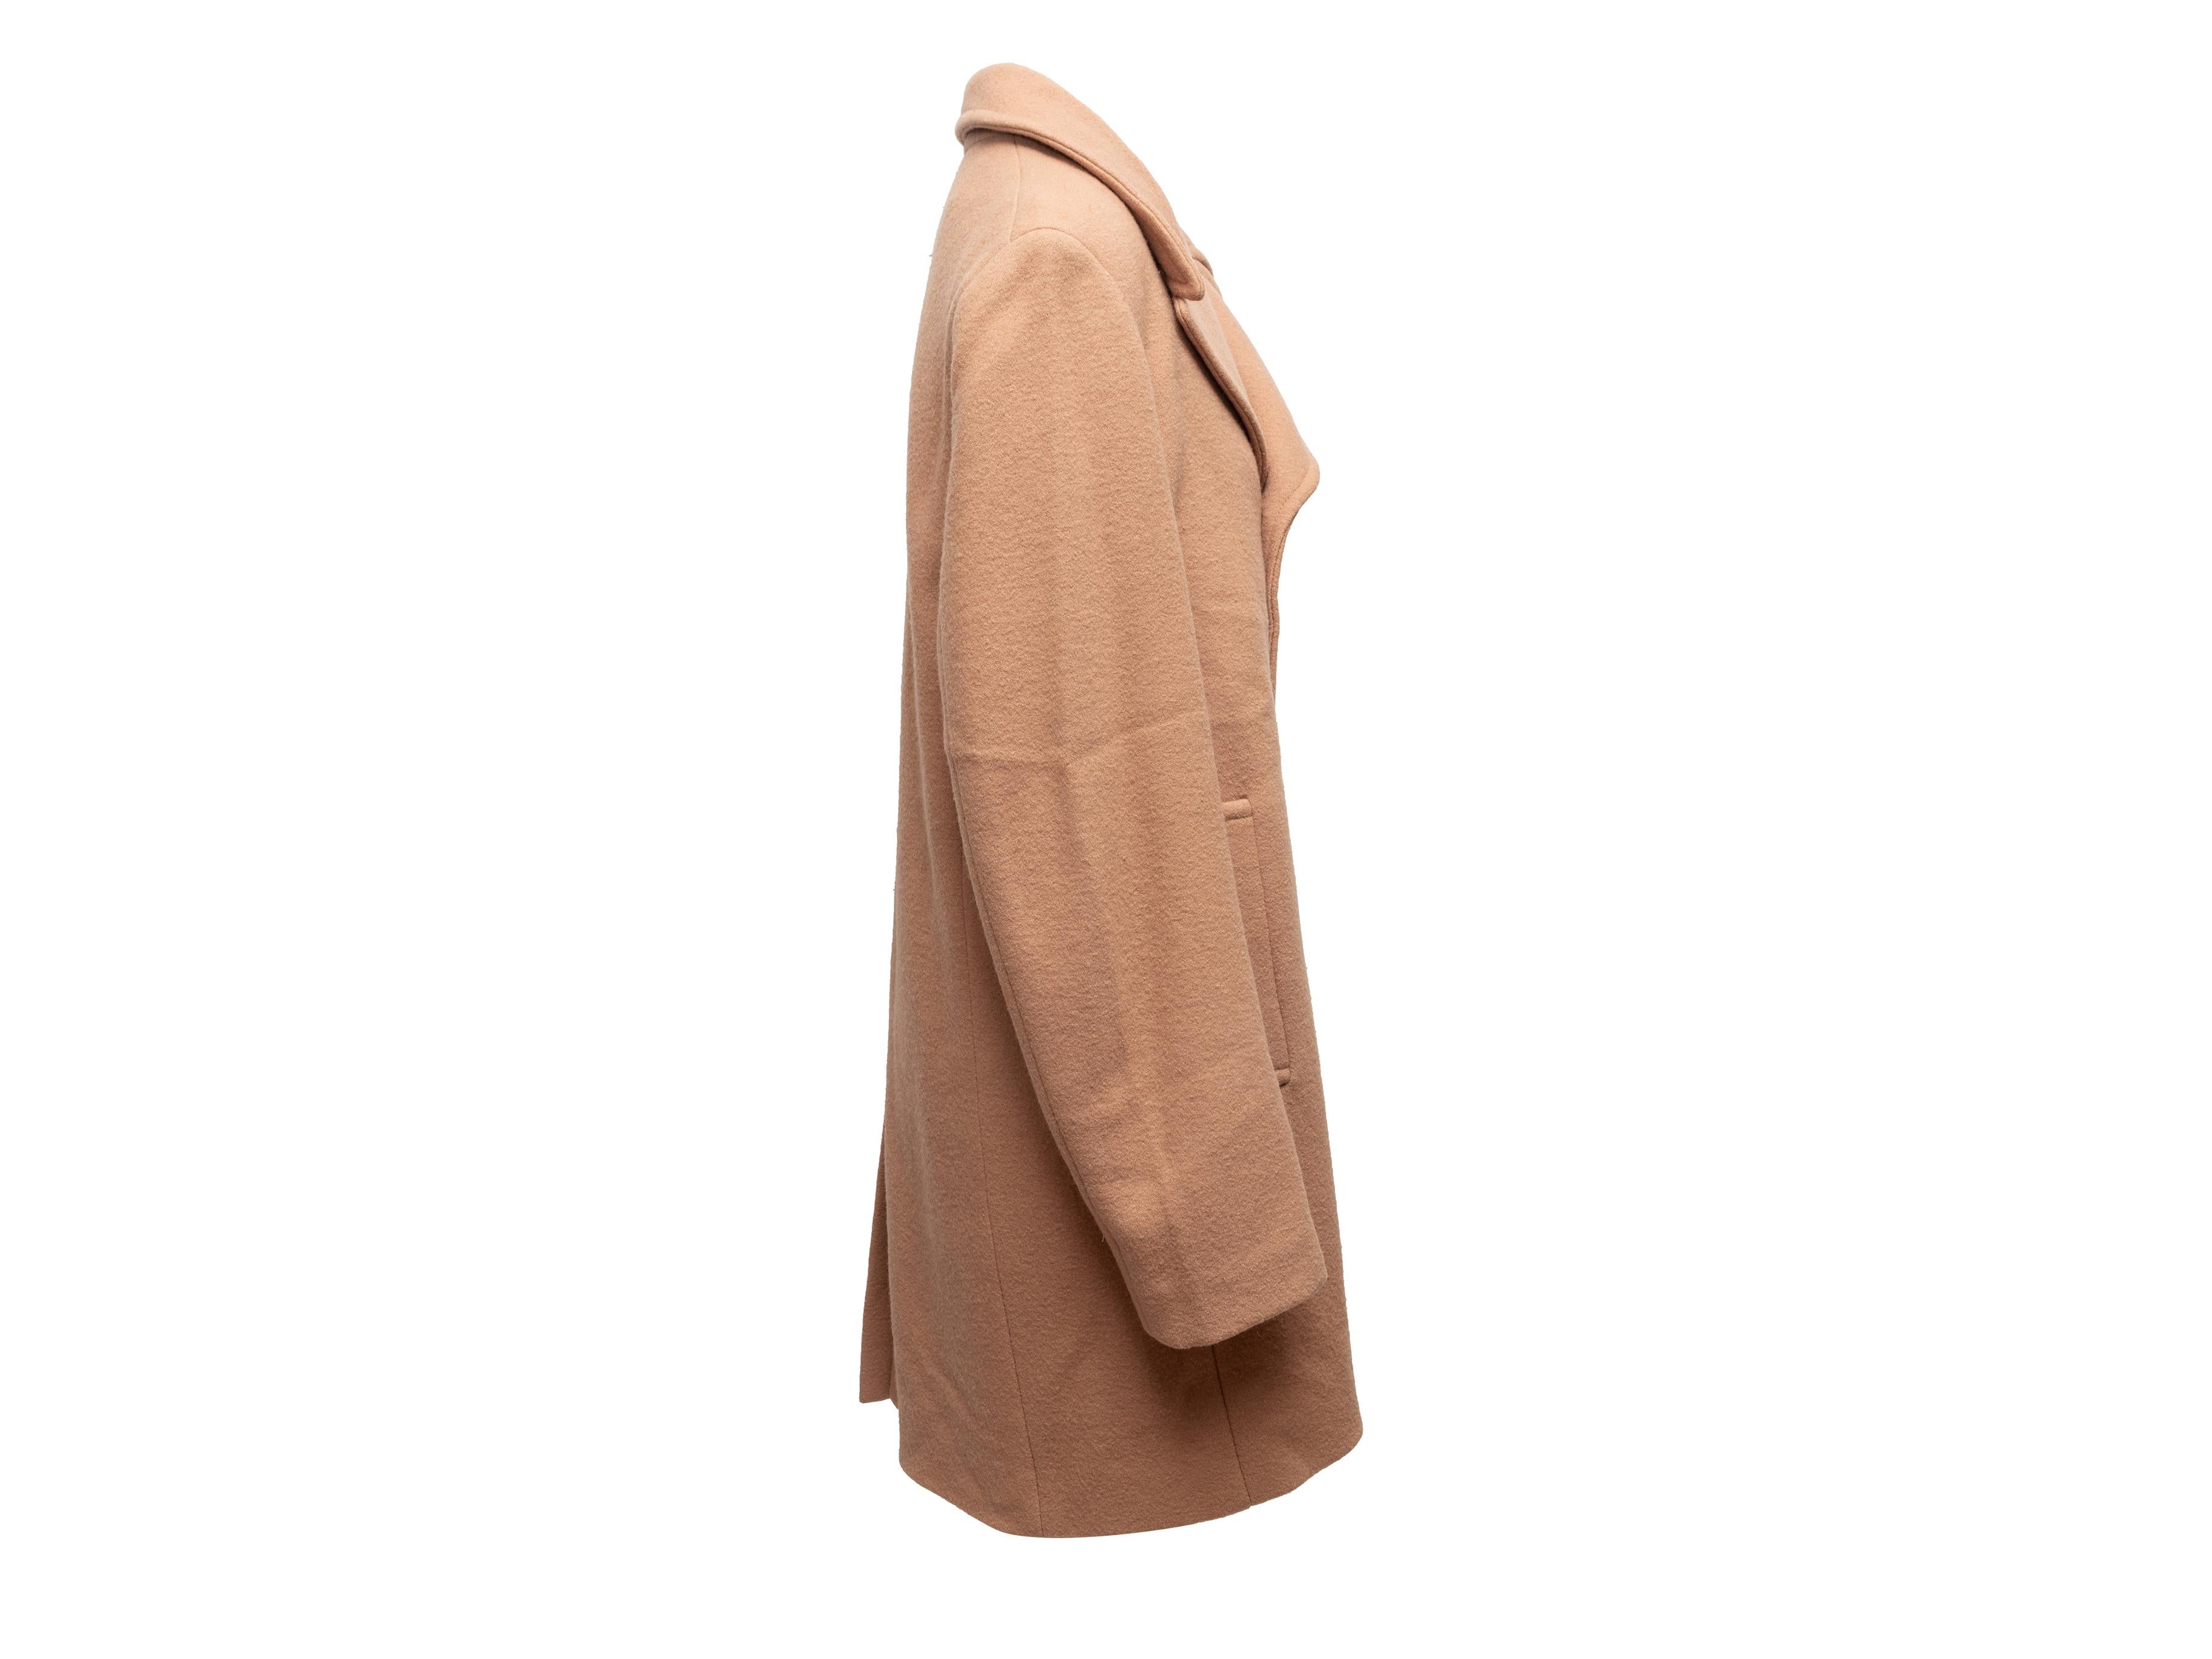 Tan wool double-breasted coat by Phillip Lim. Detachable rabbit fur lining. Notched lapel. Dual hip pockets. Button closures at front. 40